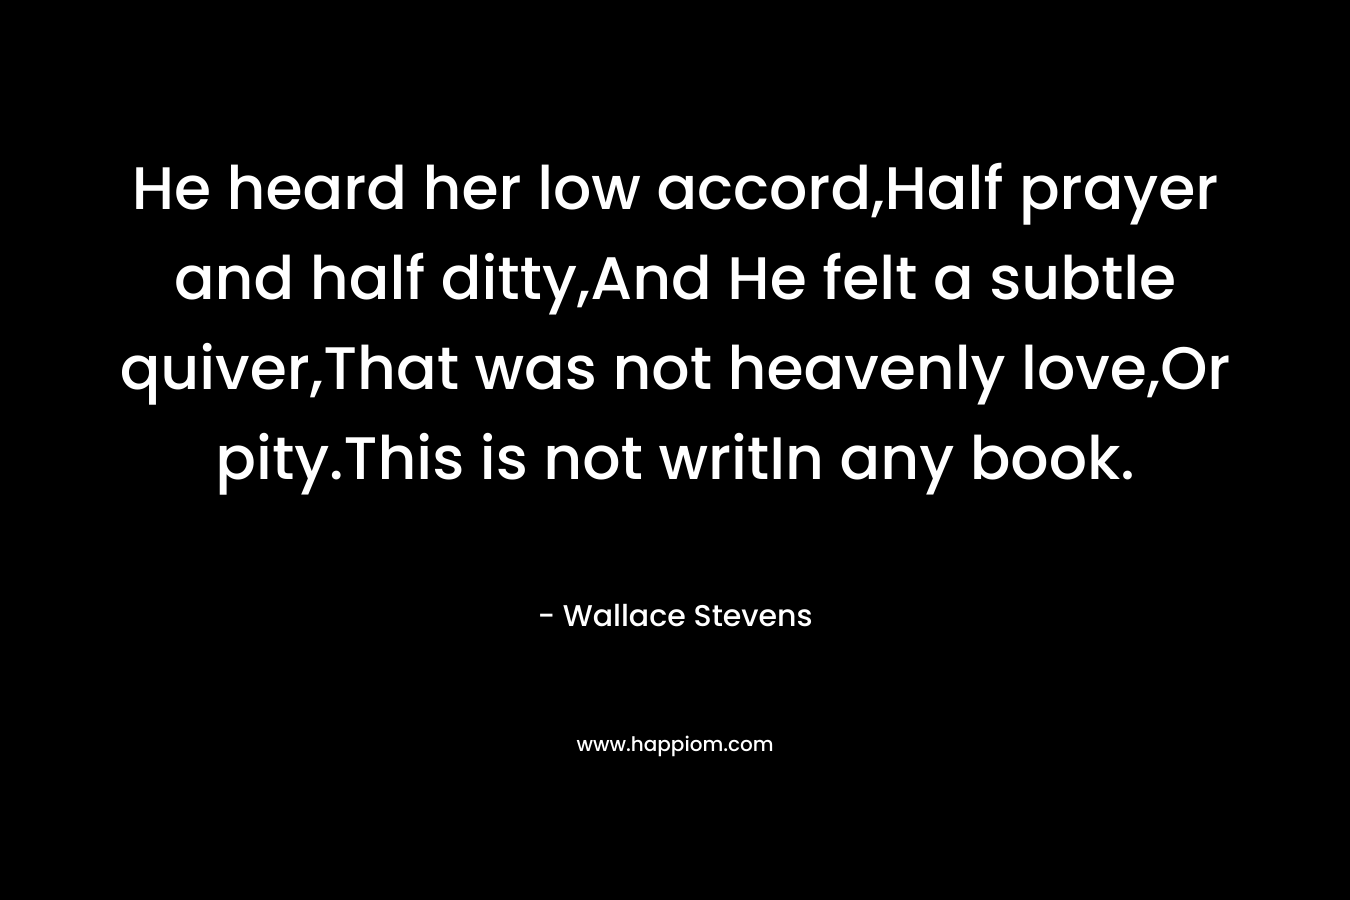 He heard her low accord,Half prayer and half ditty,And He felt a subtle quiver,That was not heavenly love,Or pity.This is not writIn any book.